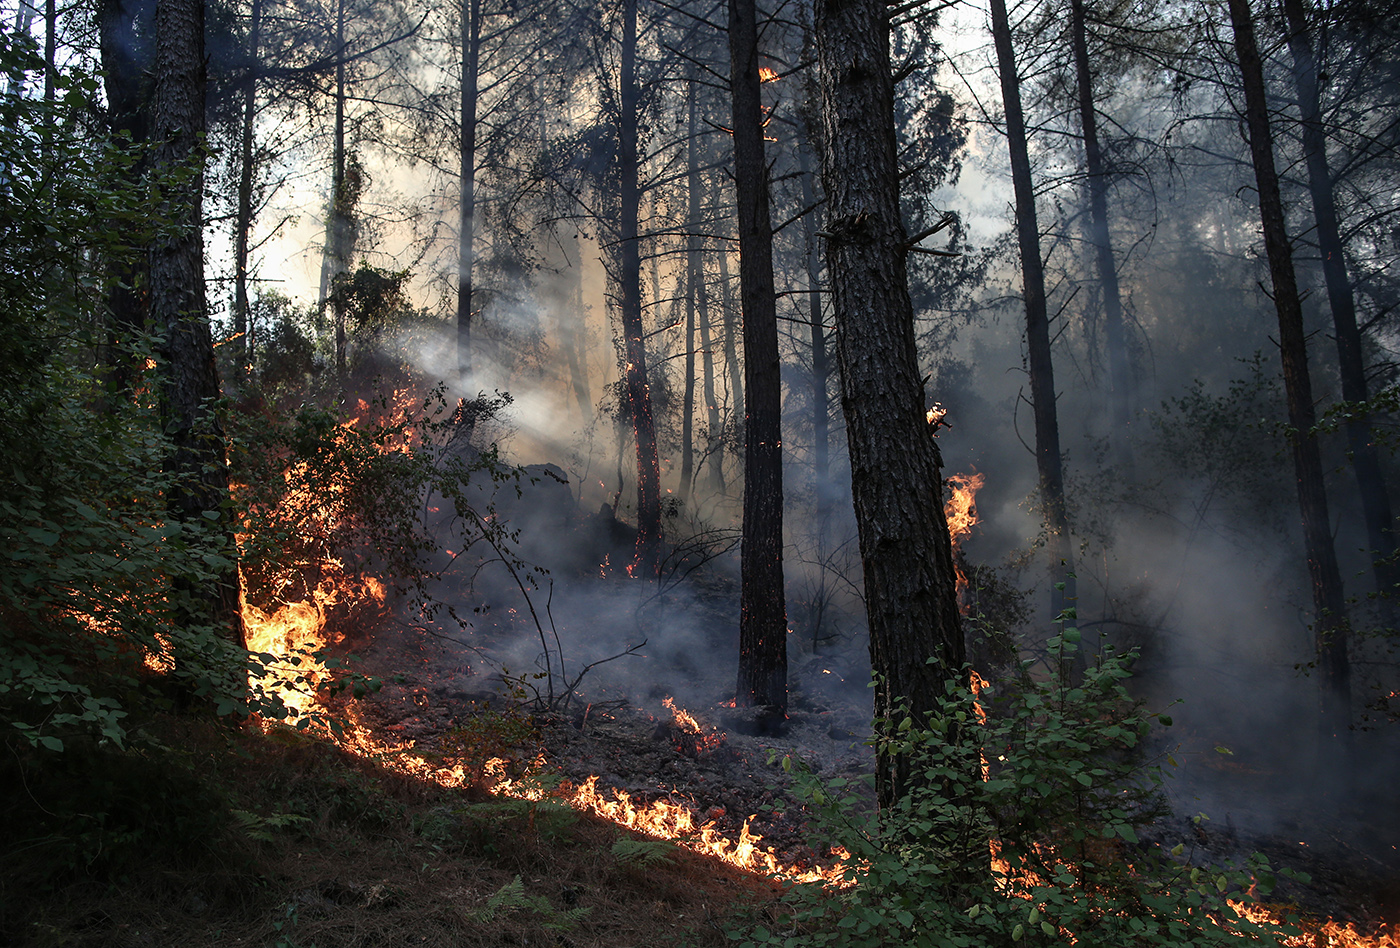 A wildfires burning at the rural of Marmaris district of Mugla, Turkey, 31 July 2021. According to a statement by the Turkish government